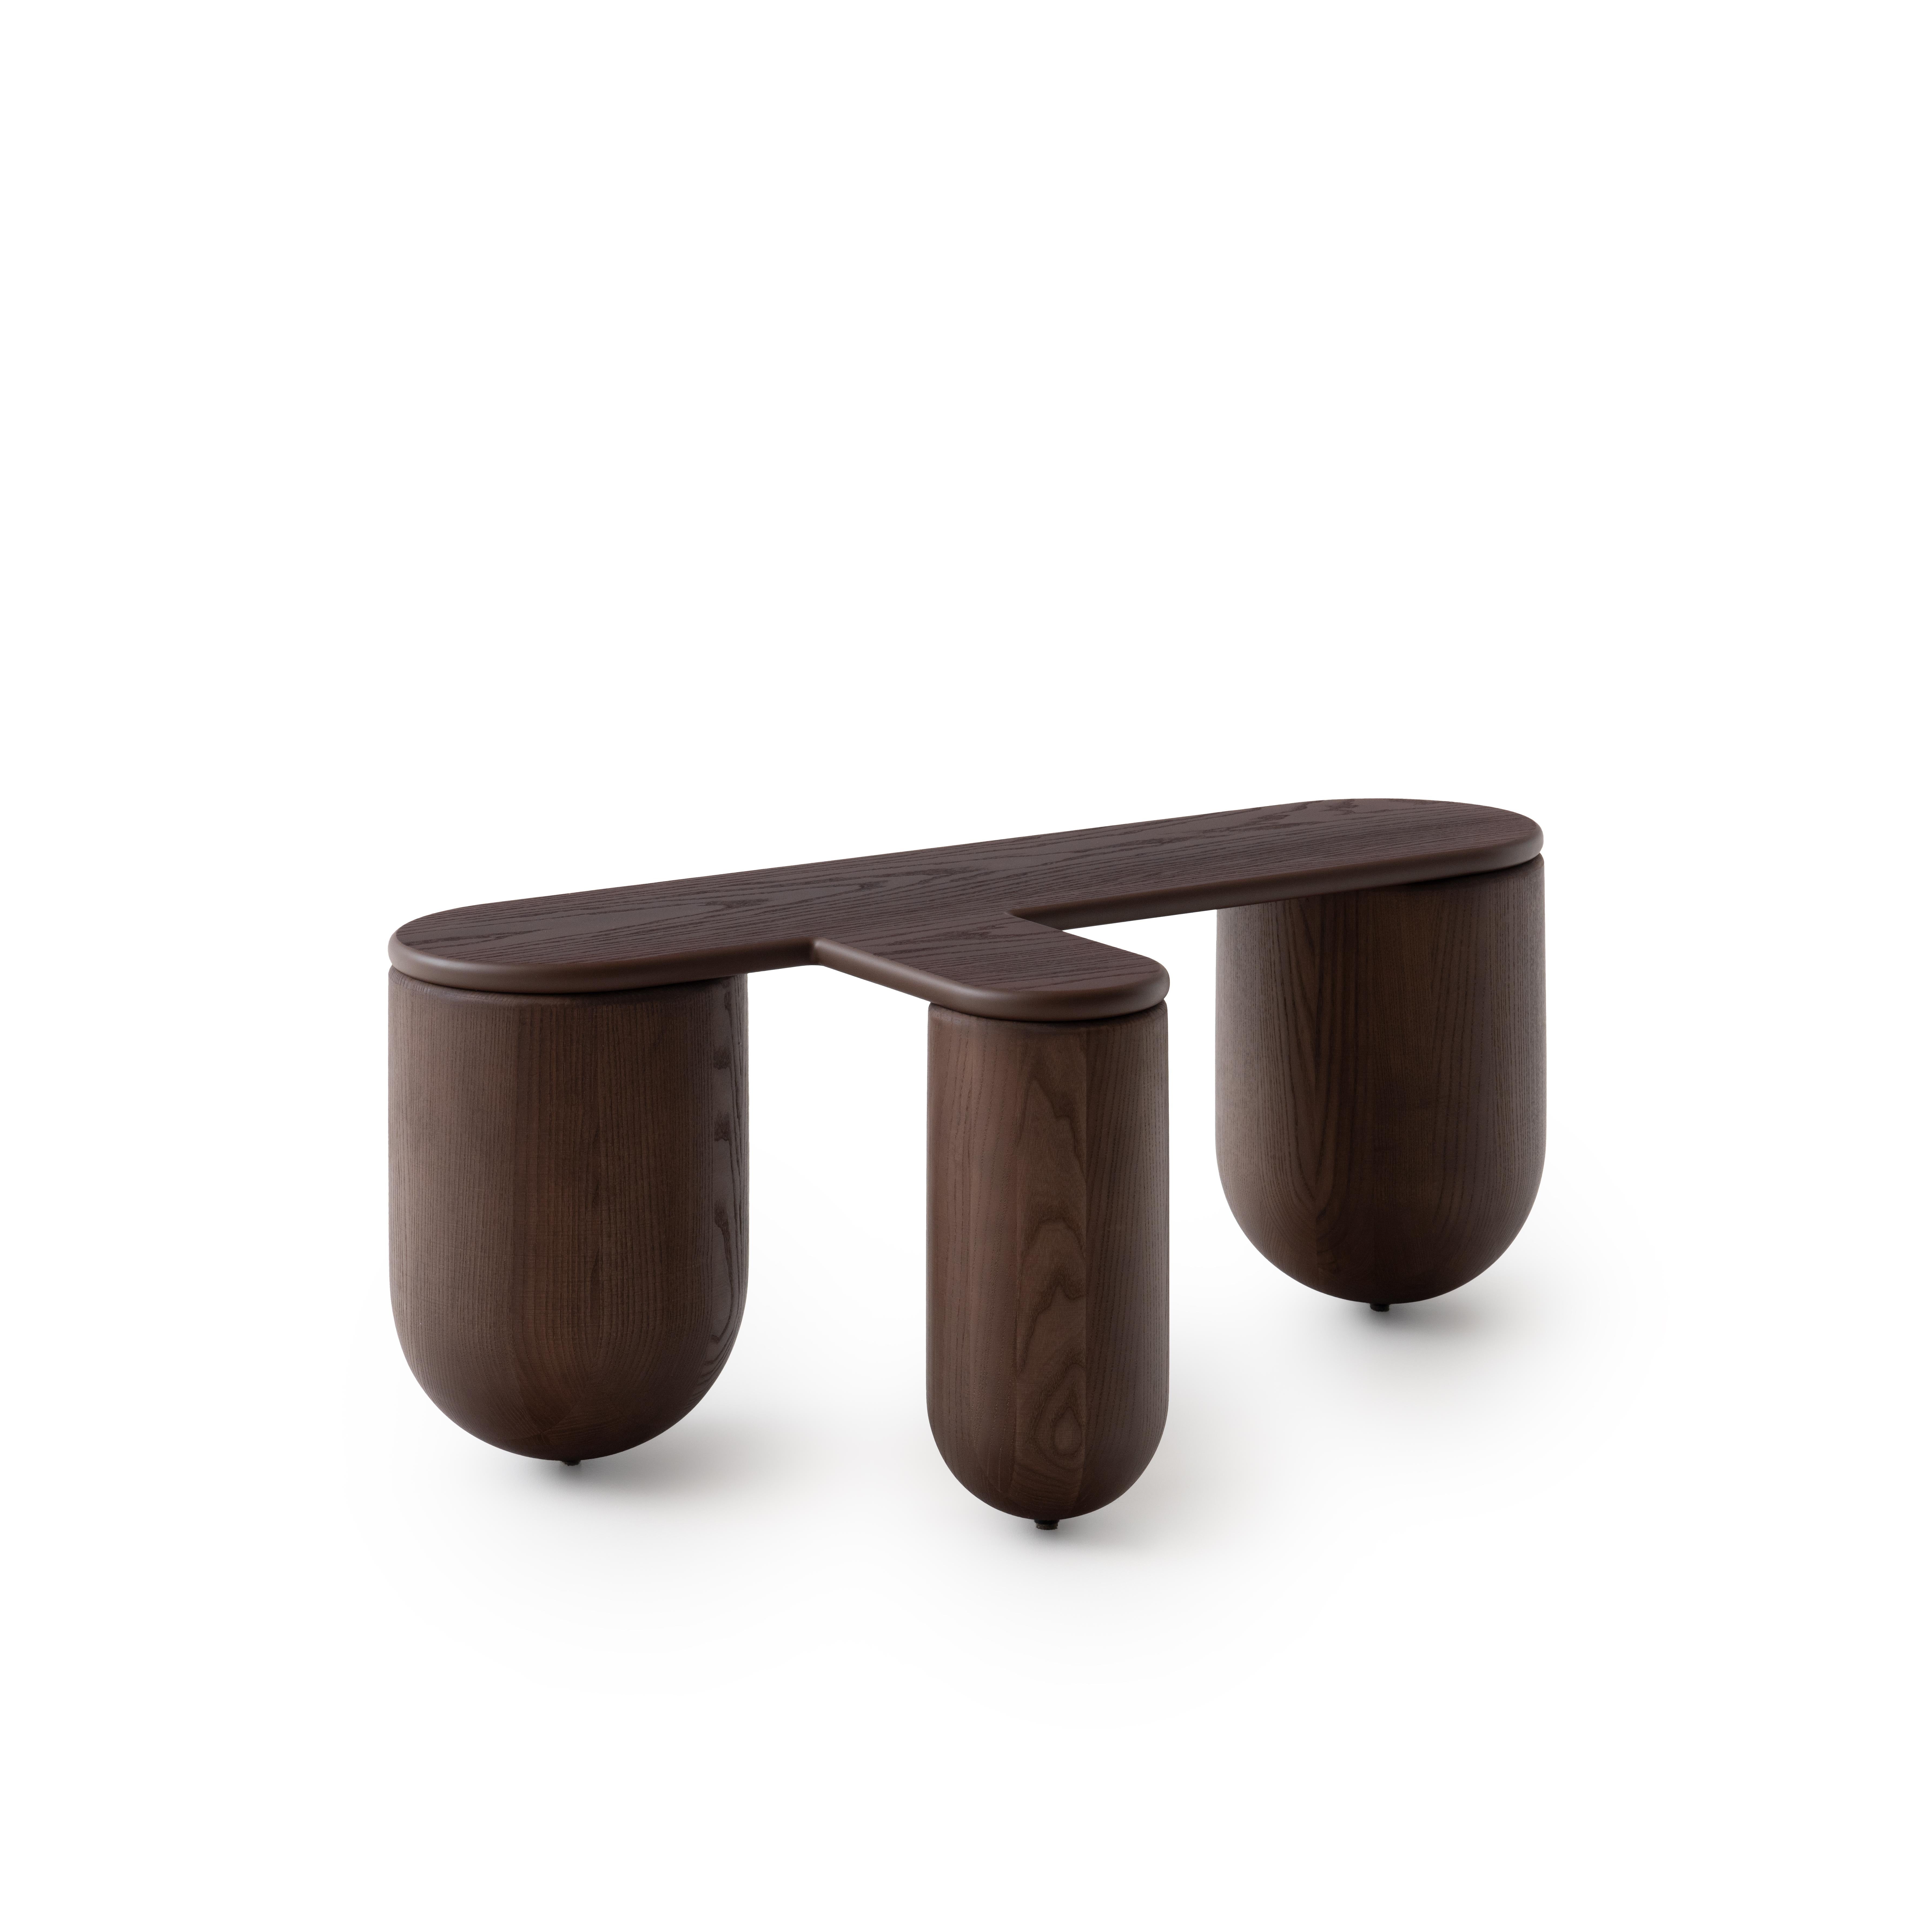 Ukrainian Contemporary Coffee Table 'Hello 3' by Noom, Ashwood, Brown For Sale